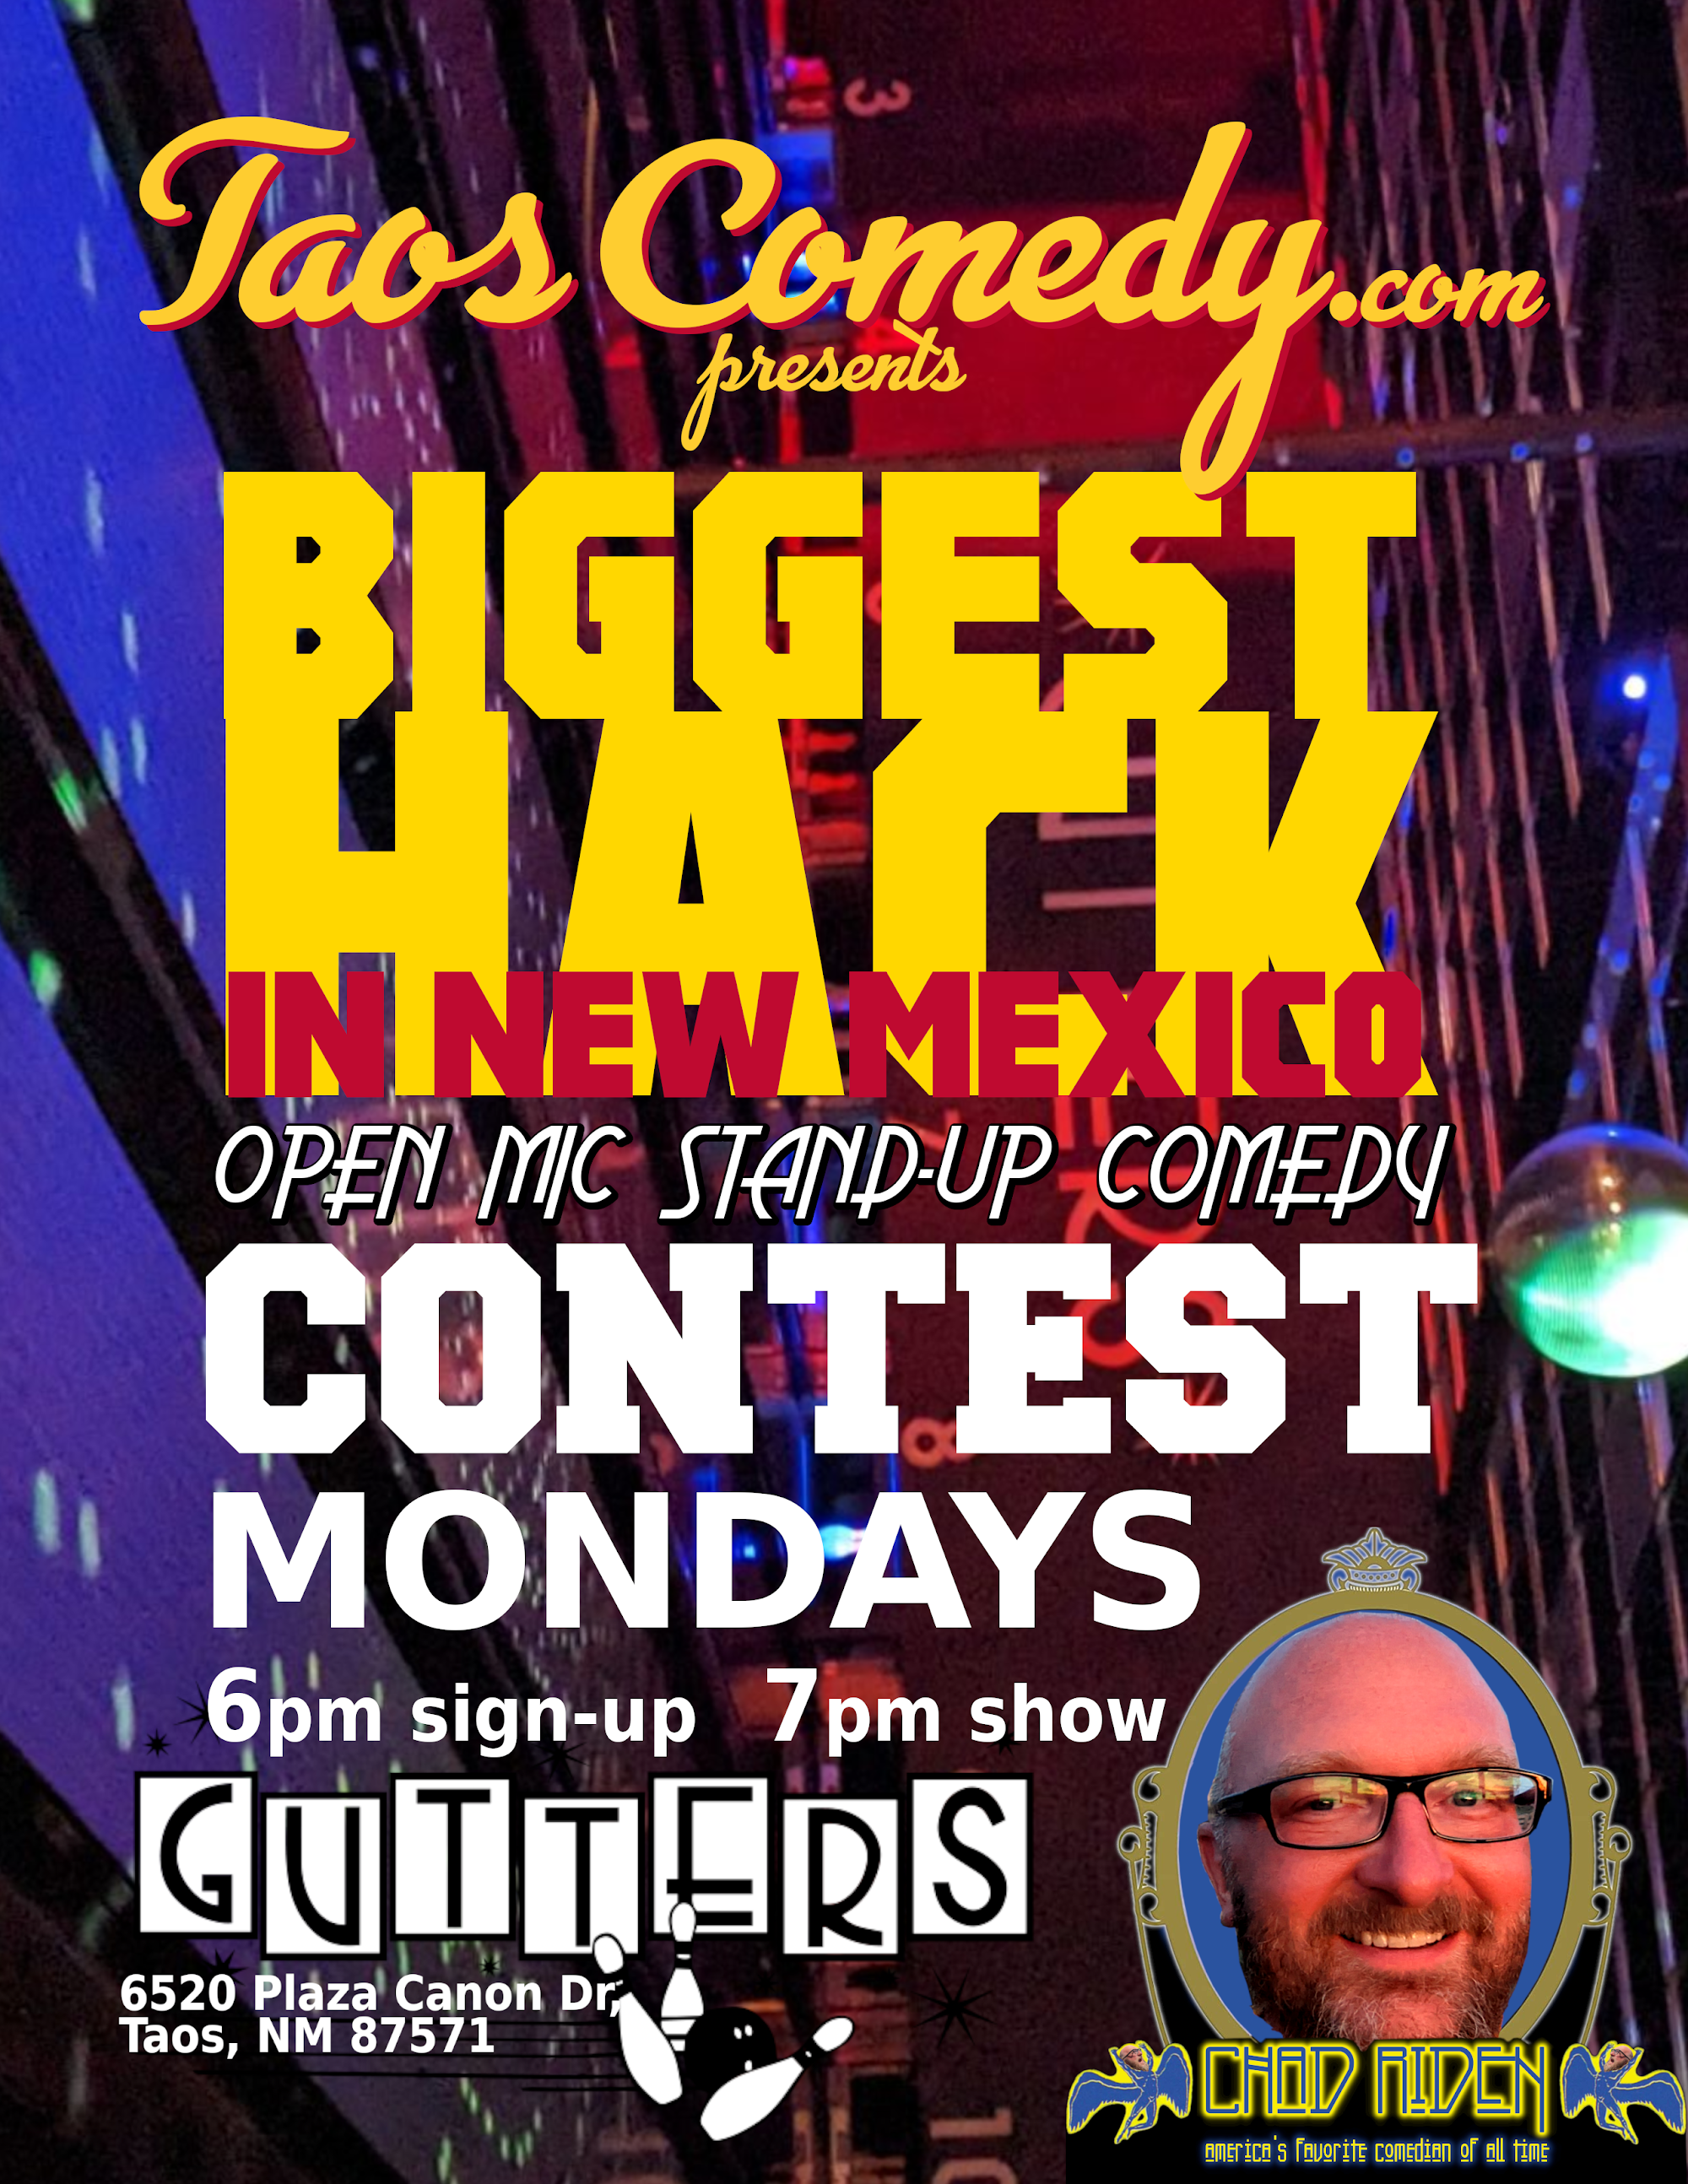 TaosComedy.com Presents.. Biggest Hack in NM open mic stand-up comedy contest MONDAYS